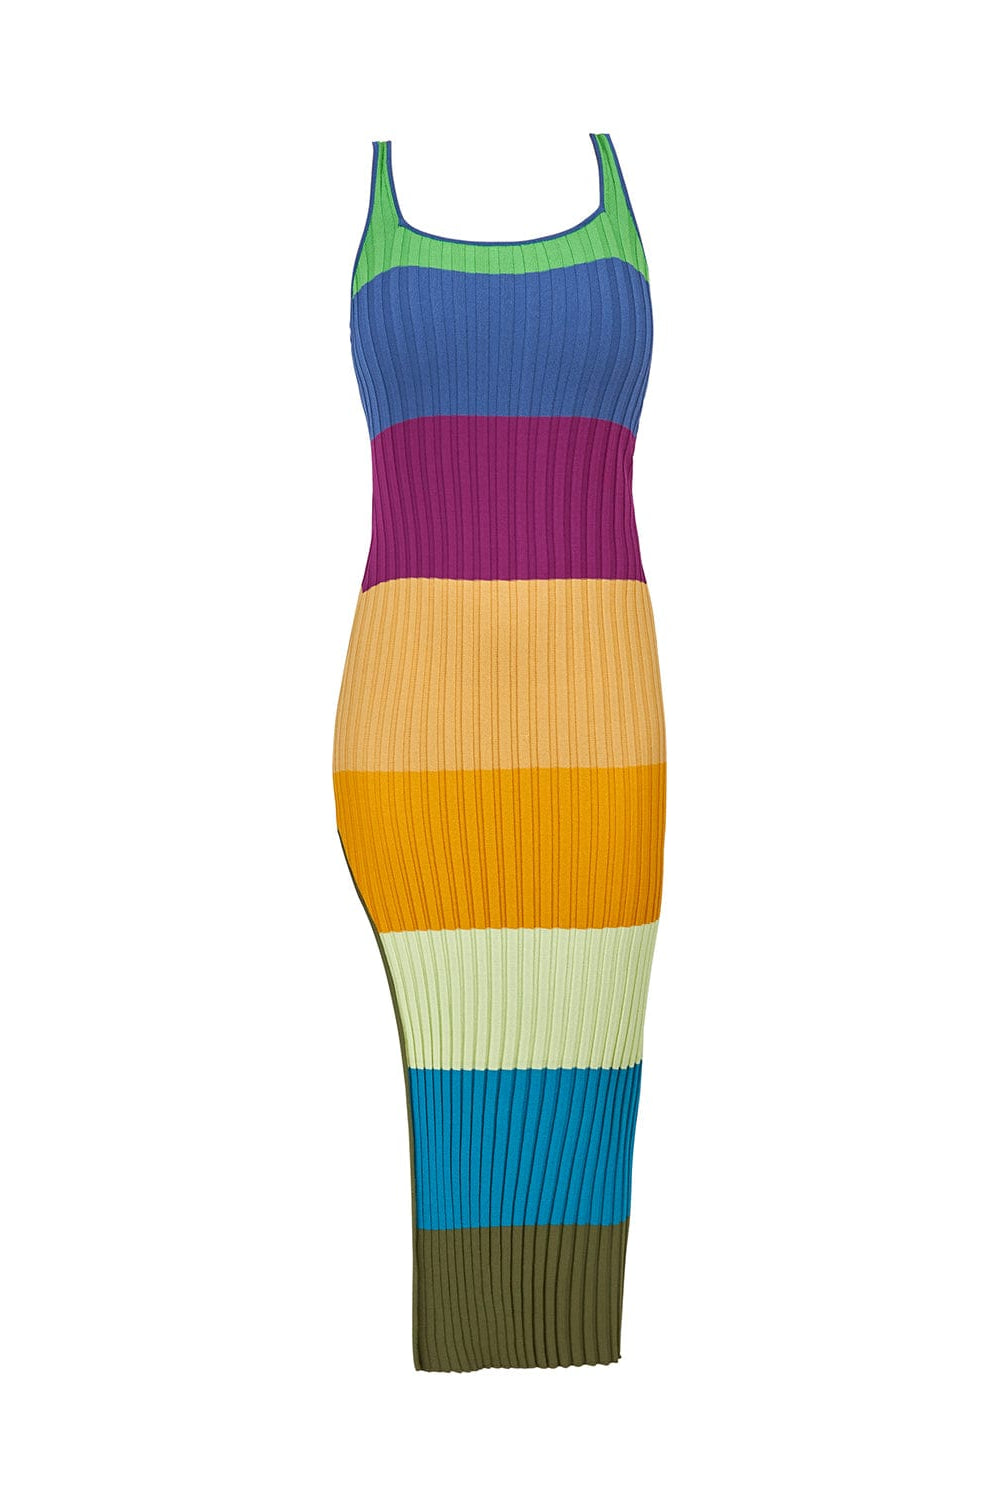 A multi-colored stripe pattern dress with side slit. Featured against a white wall background.